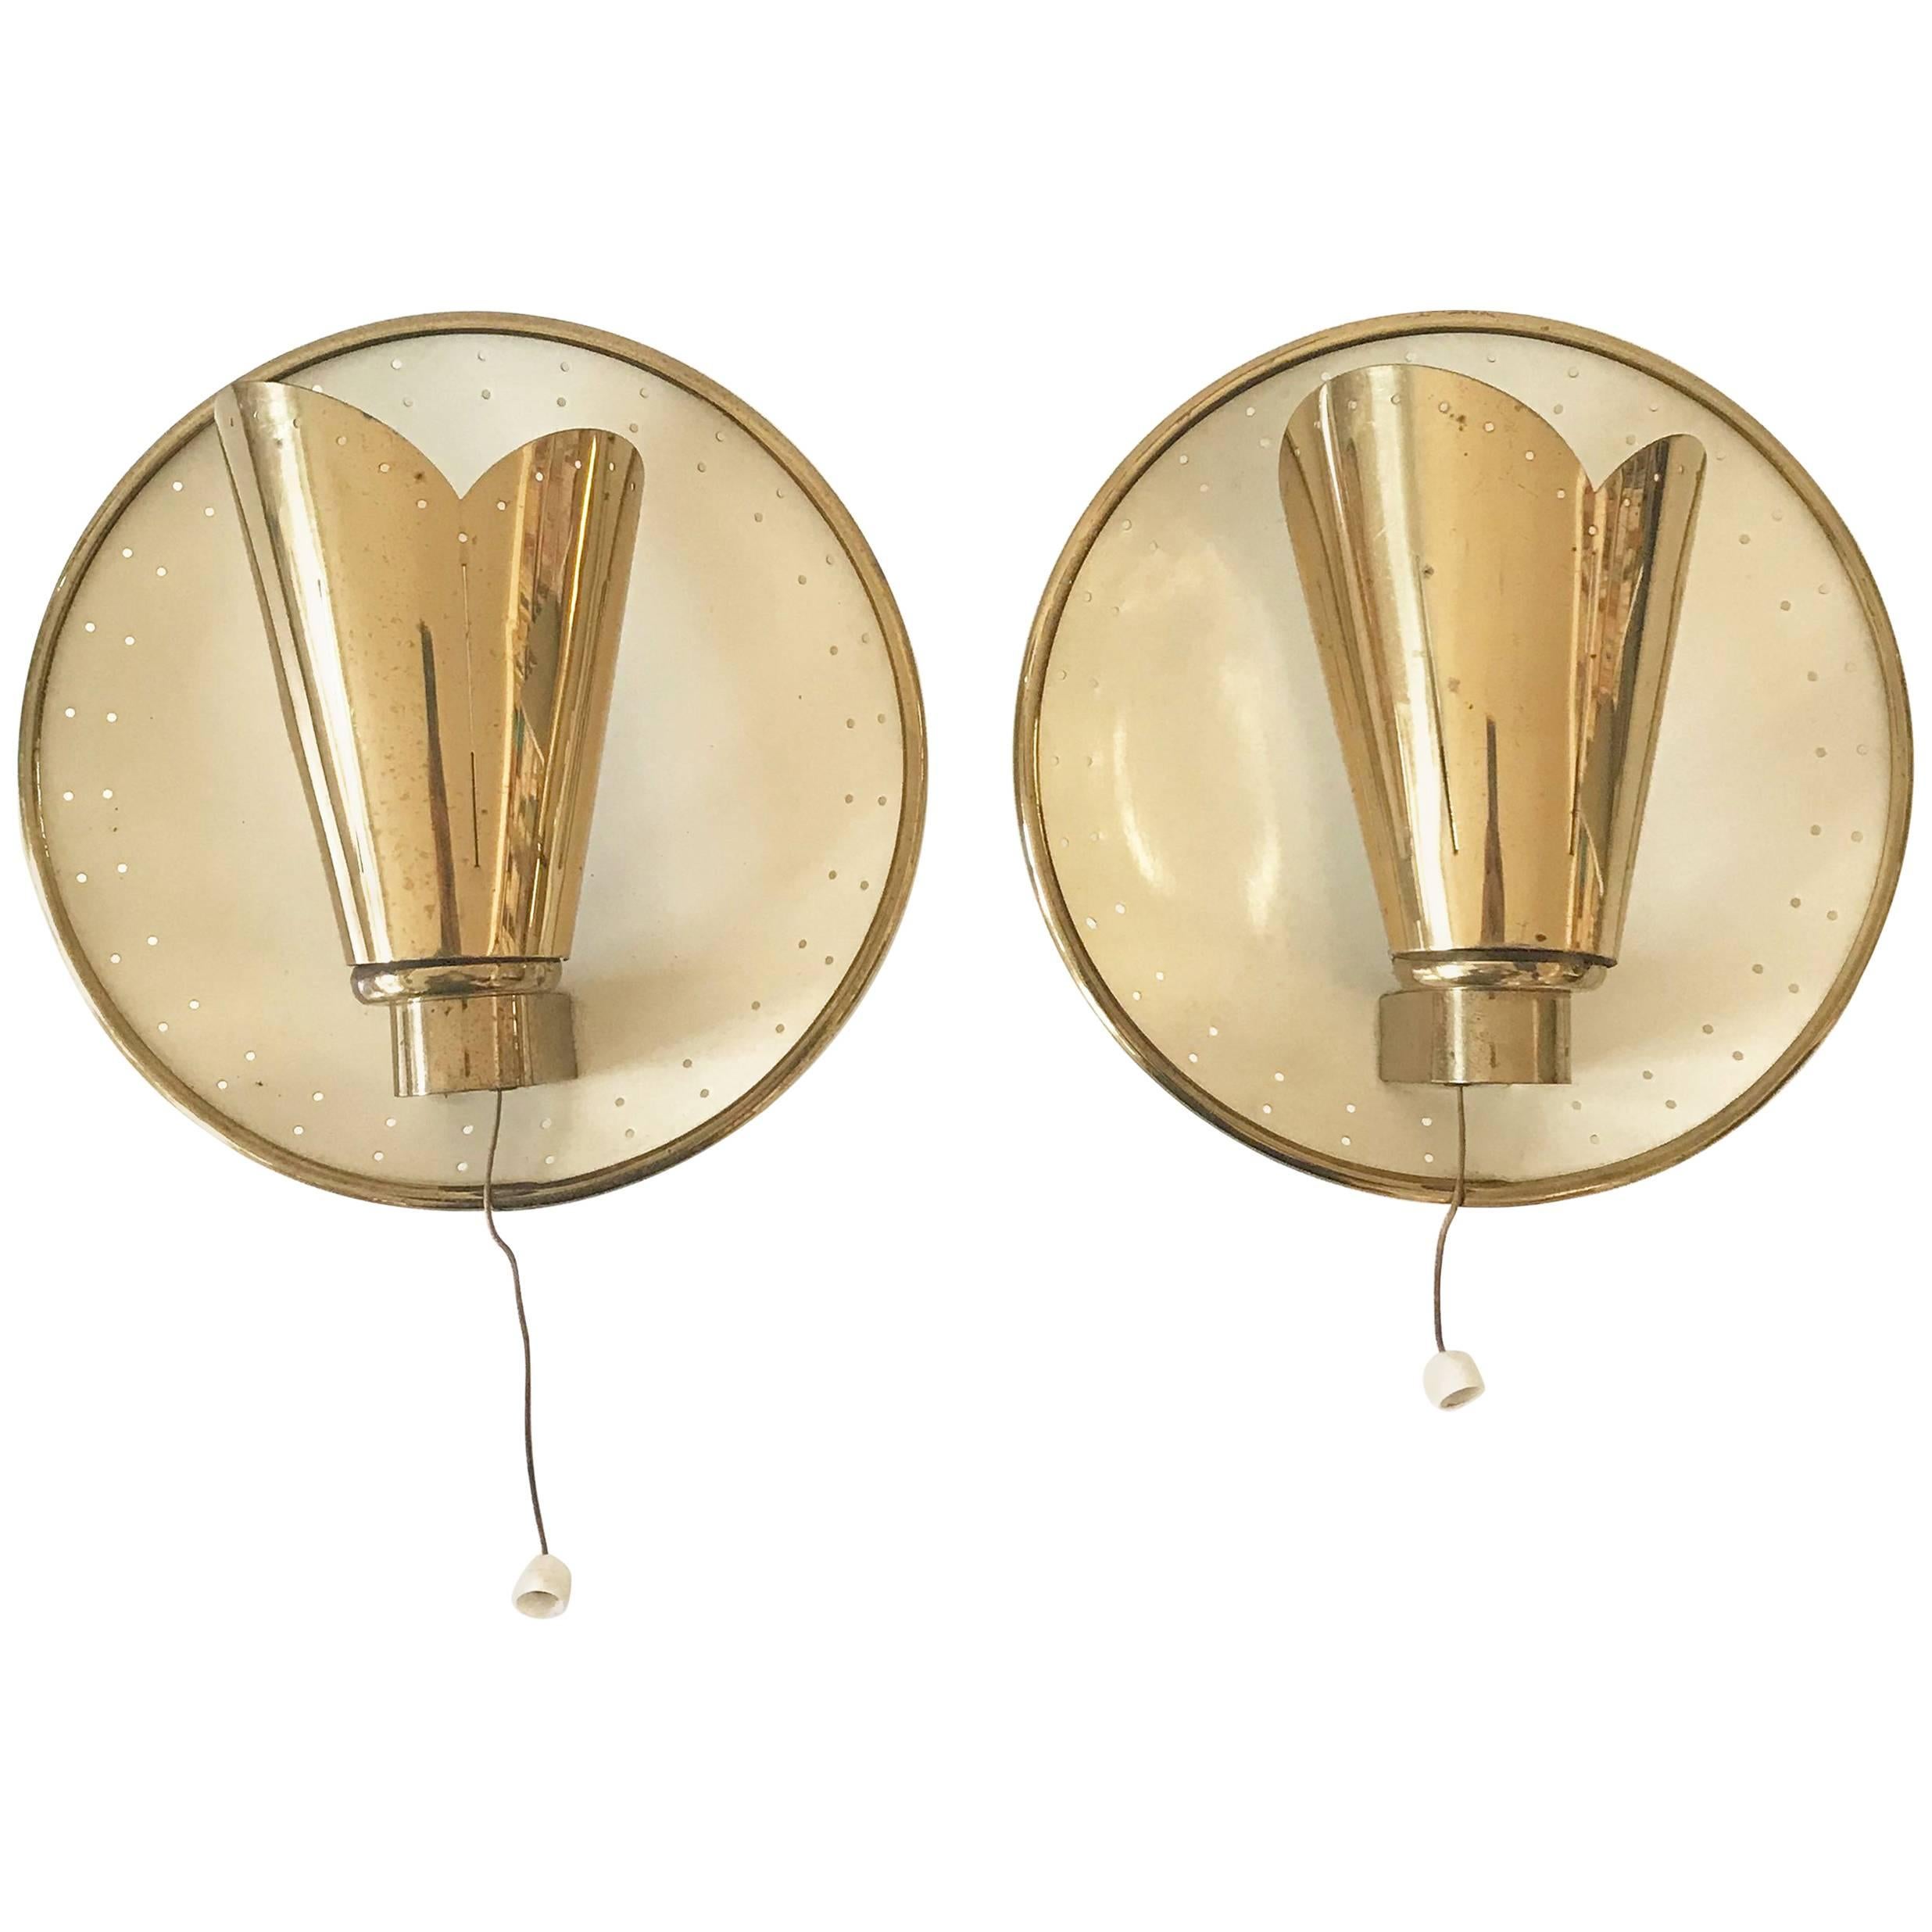 Set of Two Elegant Mid Century Modern Sconces or Wall Lamps by Jacques Biny